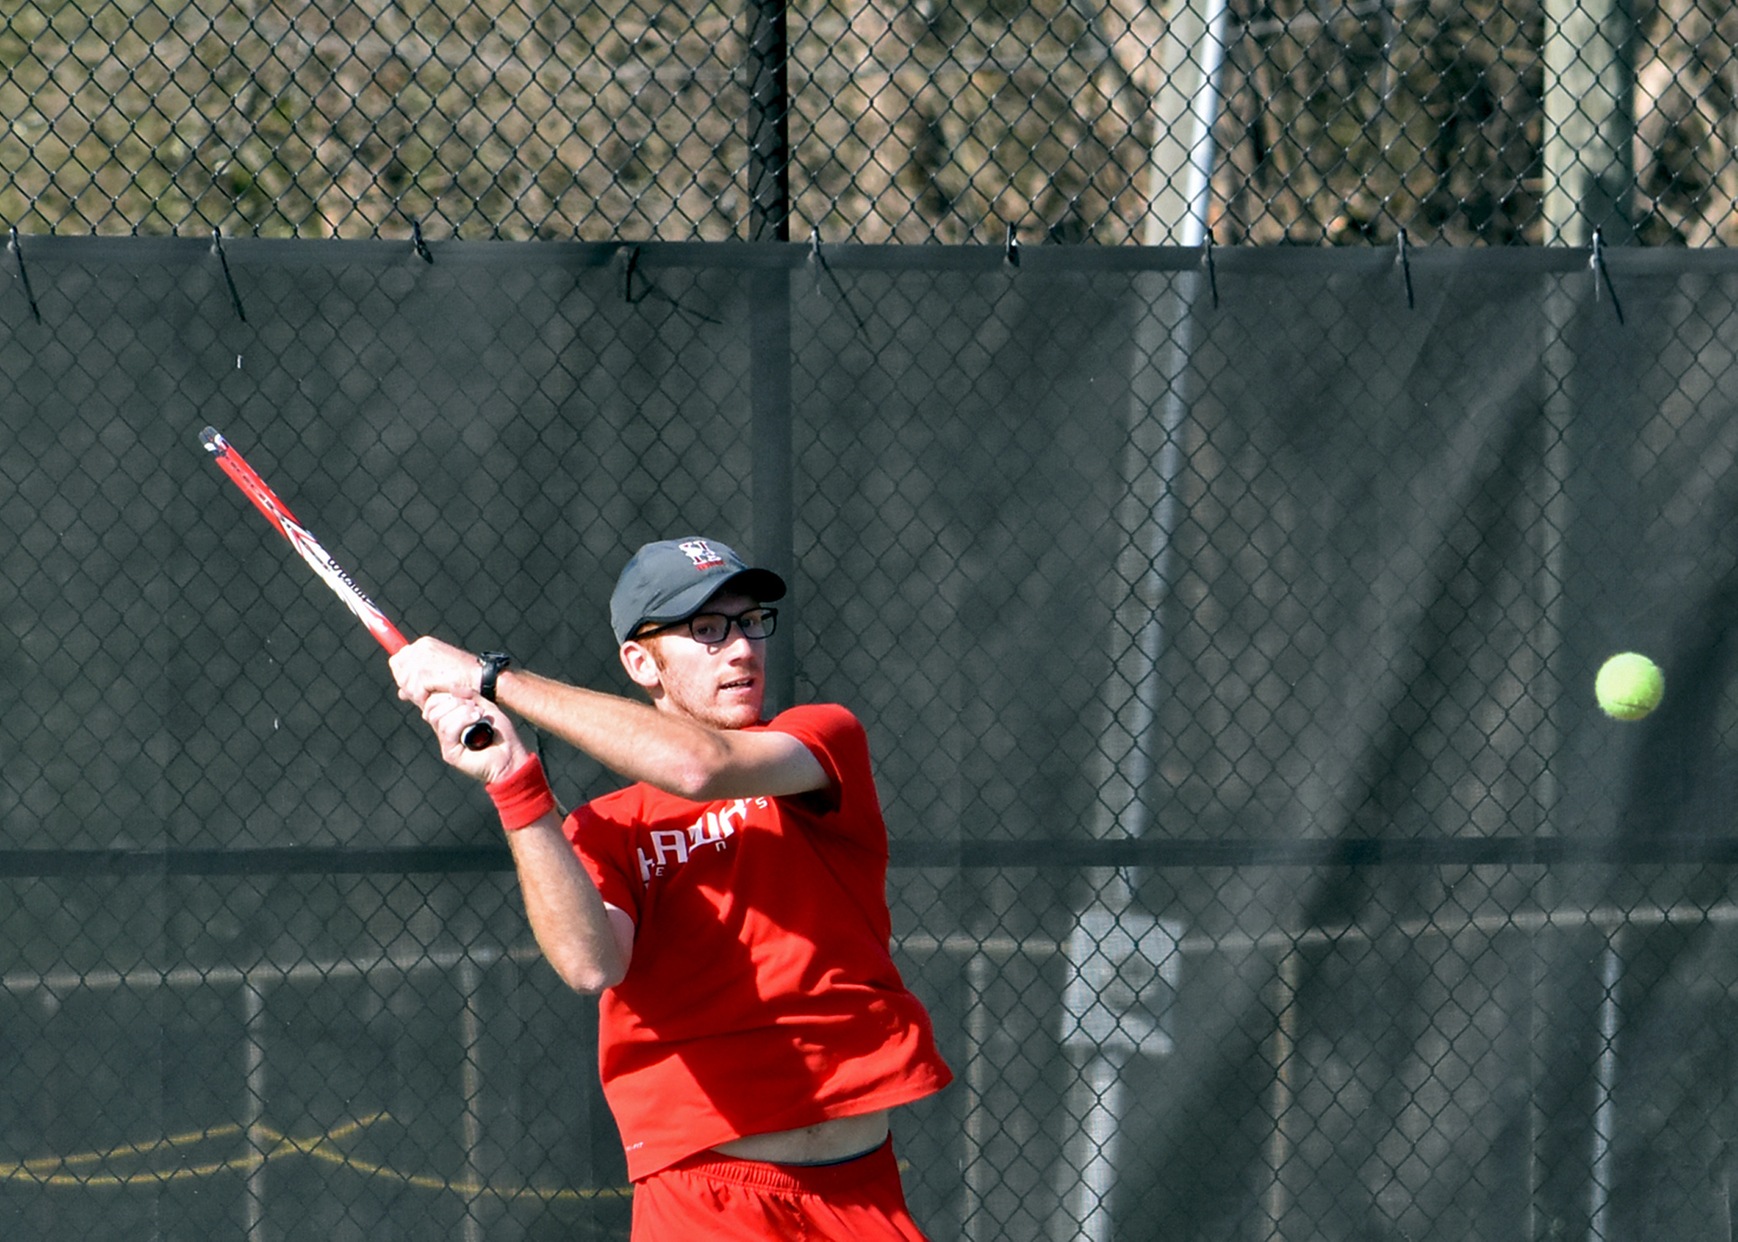 Bailey Burns won 6-4, 6-3 at No. 1 singles and teamed with John Jones to win 8-6 at No. 1 doubles on Saturday against Tuskegee.